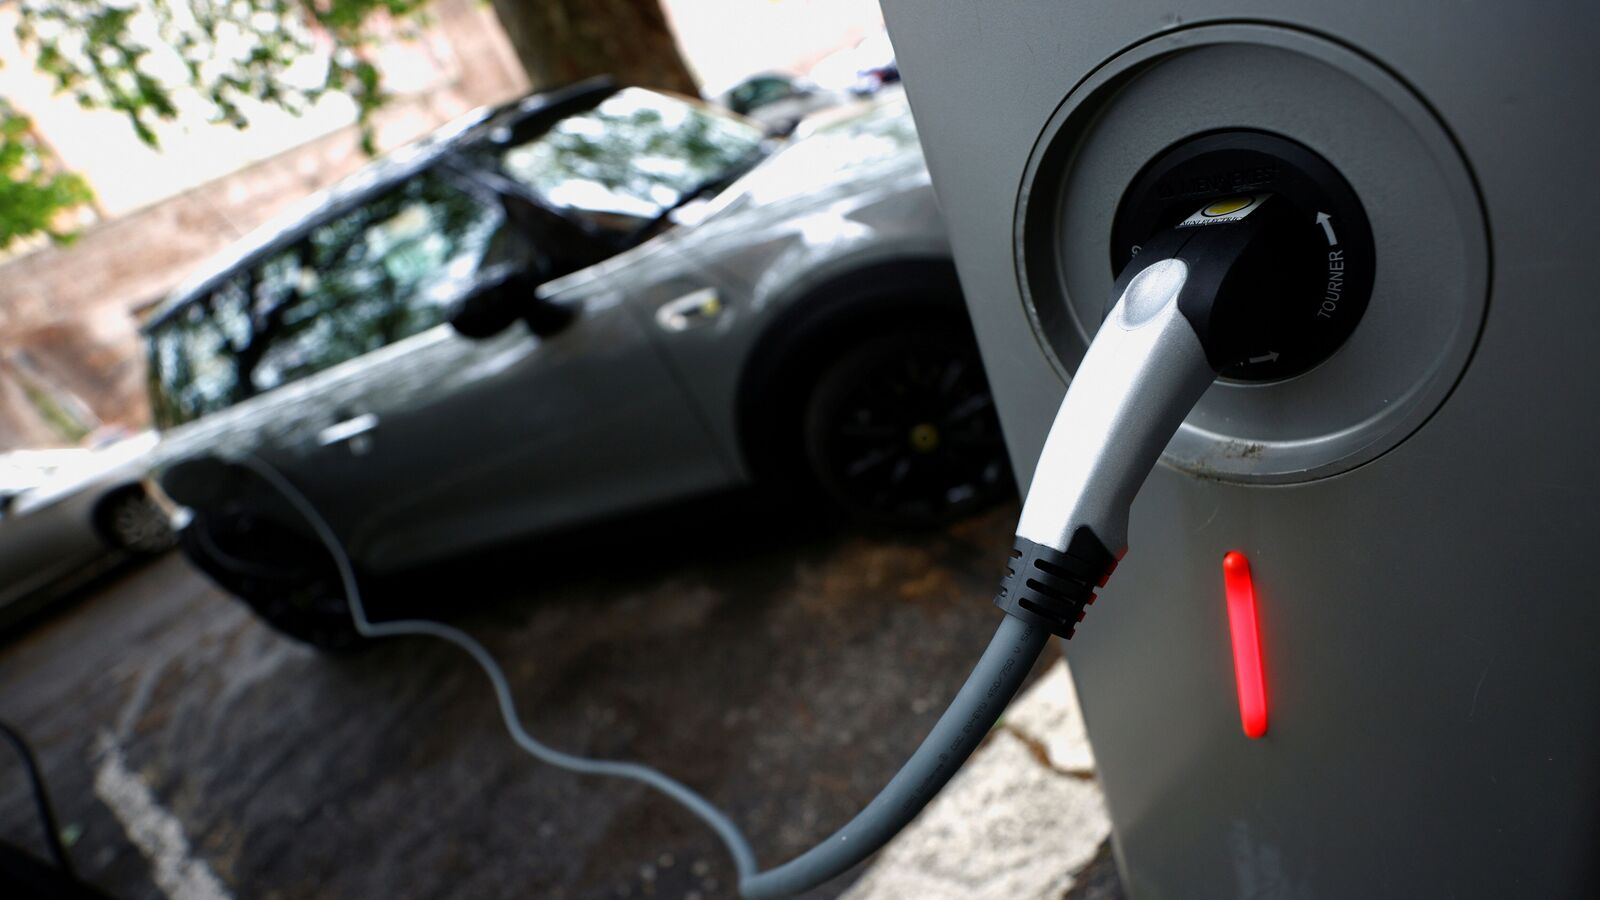 Subsidy on Electric Car: Italy to give electric car buyers up to 6000 euros subsidy | Electric Vehicles News